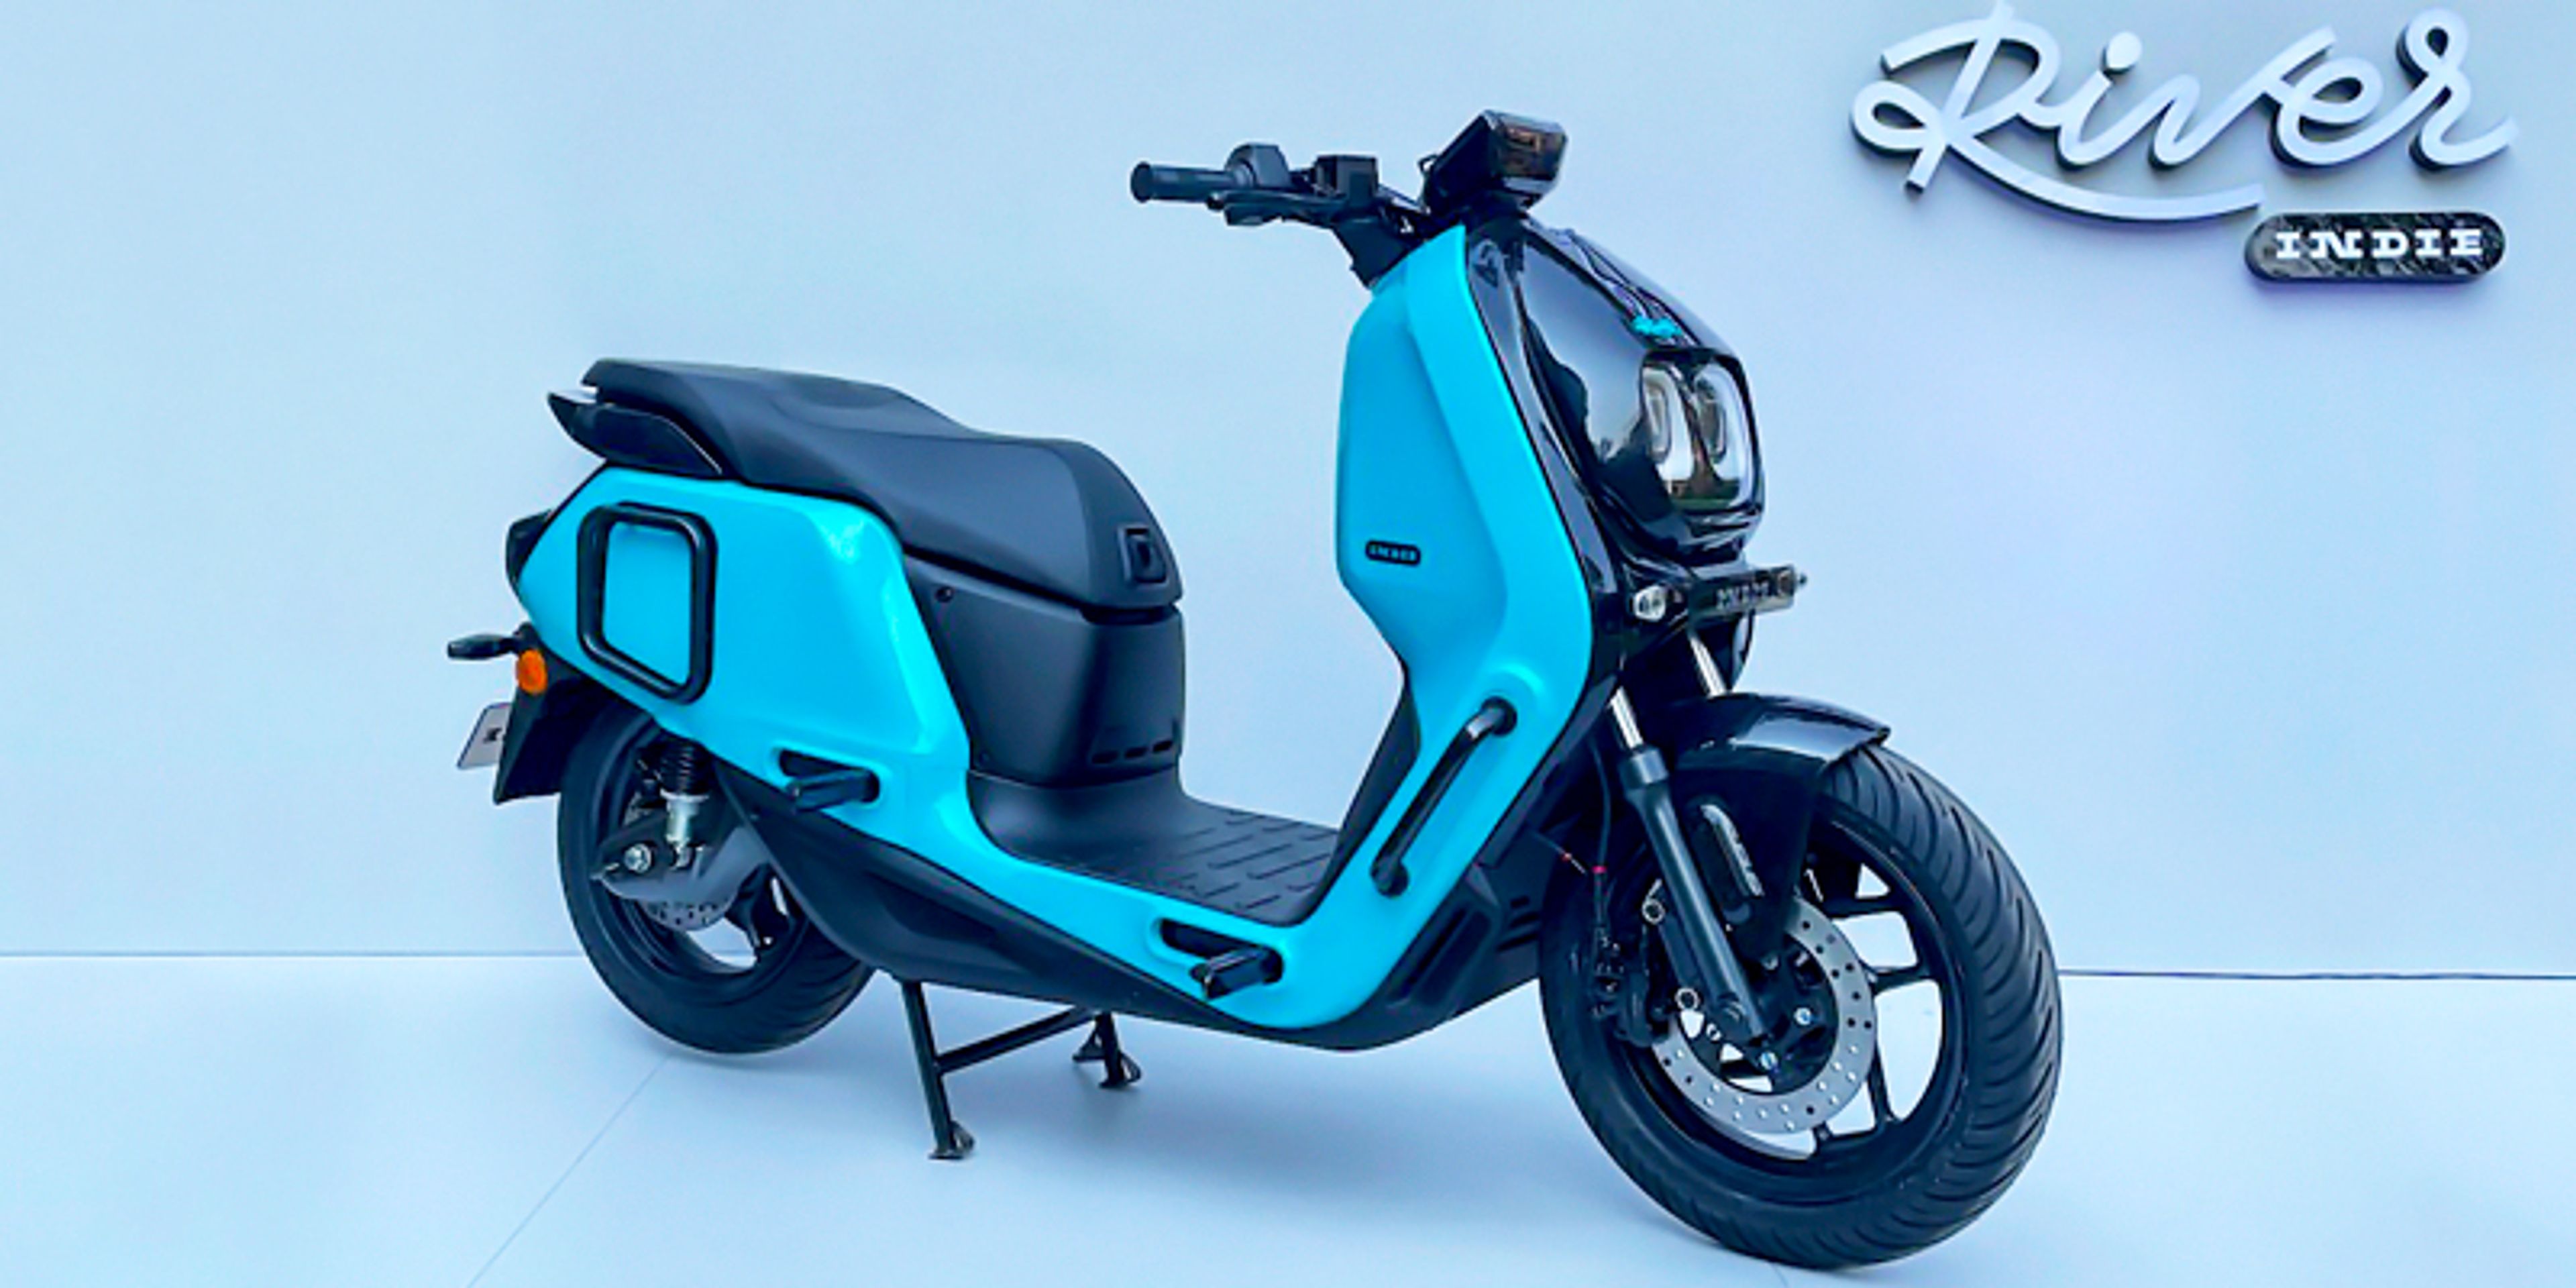 River Indie electric scooter launched at Rs 1.25 lakh, is it an SUV of scooters?